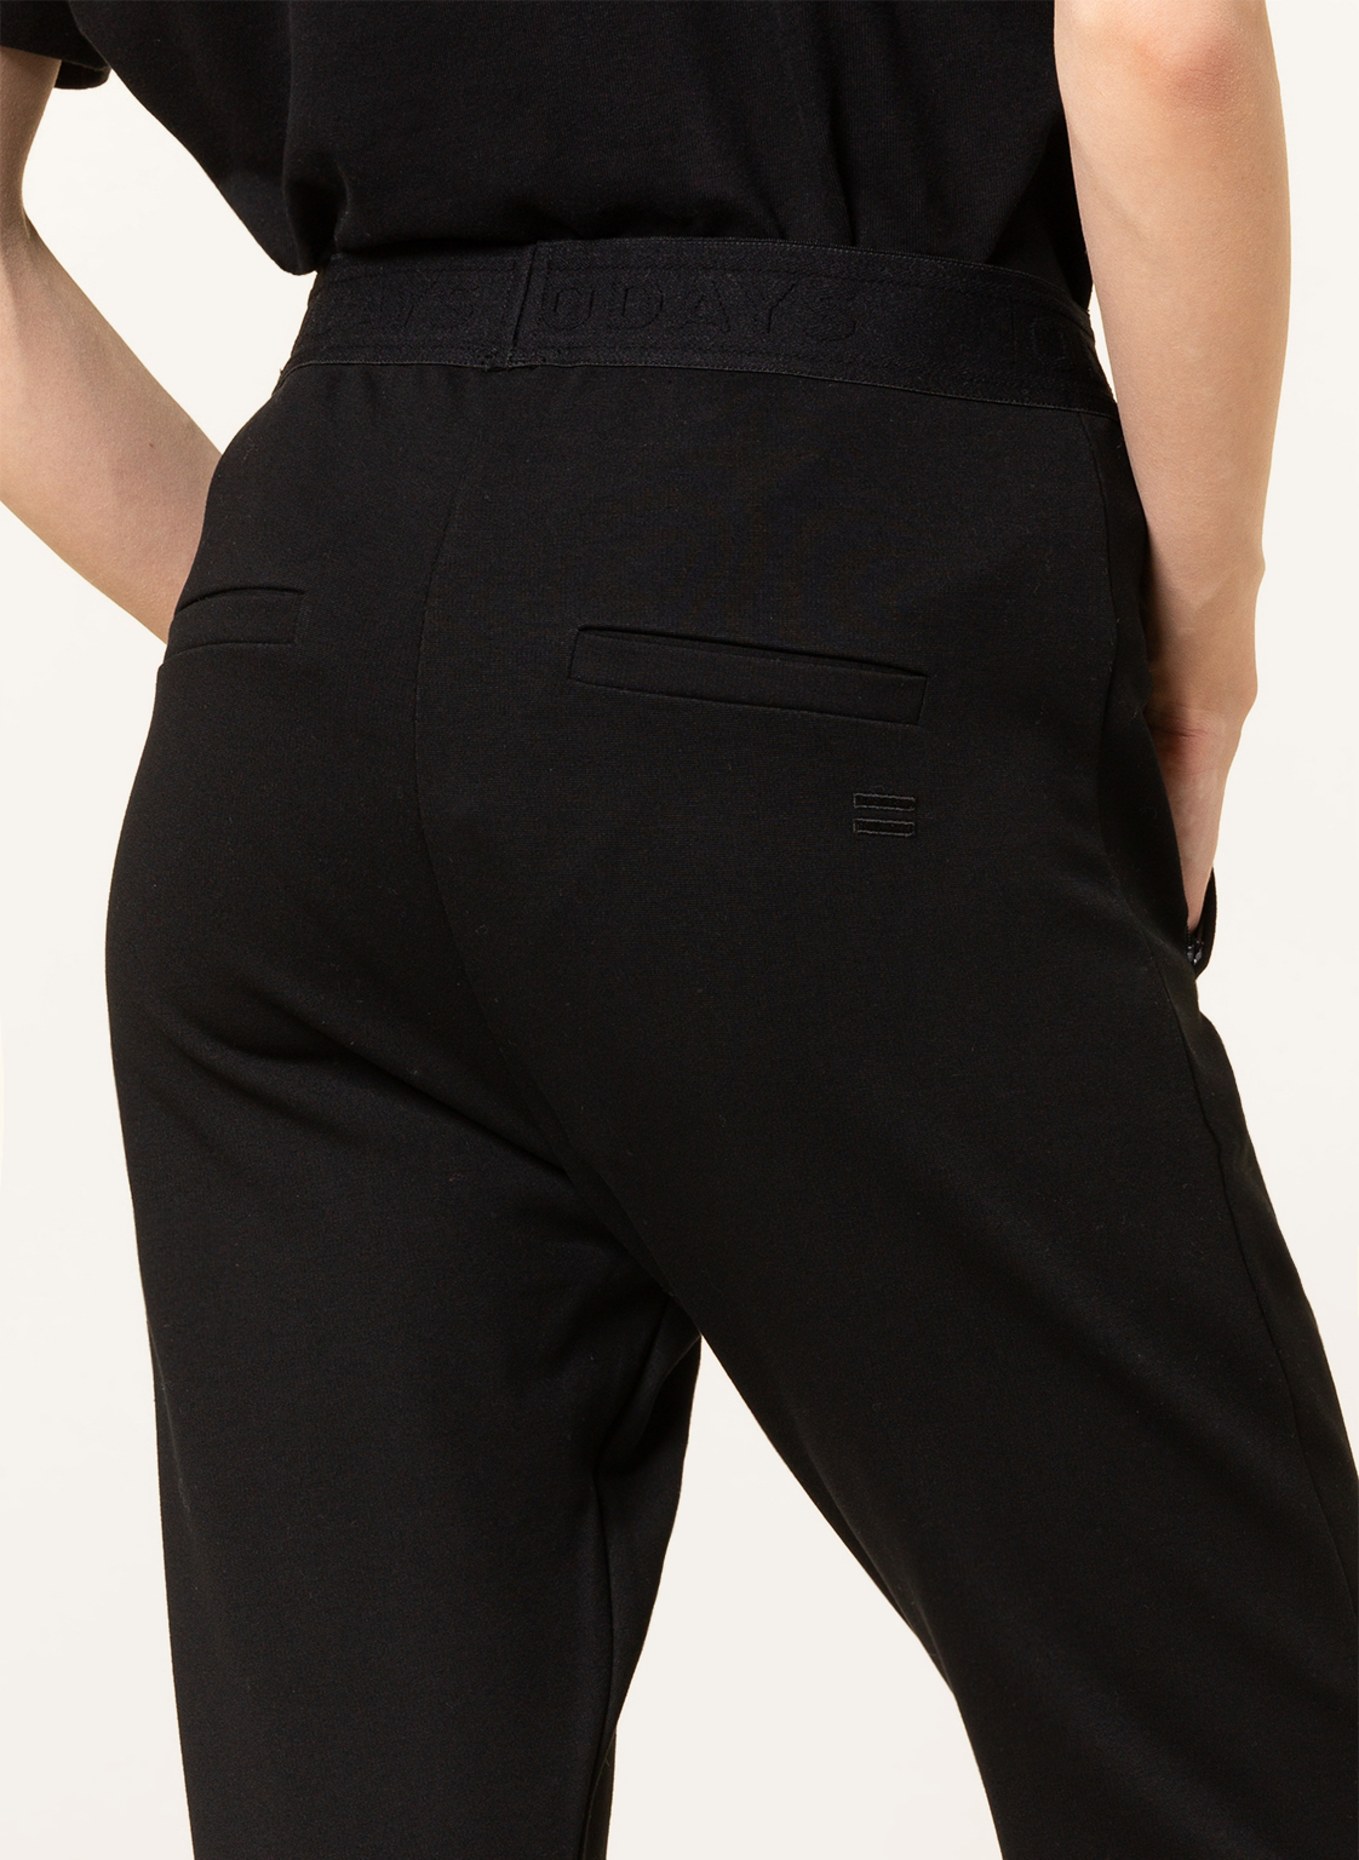 10DAYS Pants in jogger style, Color: BLACK (Image 5)